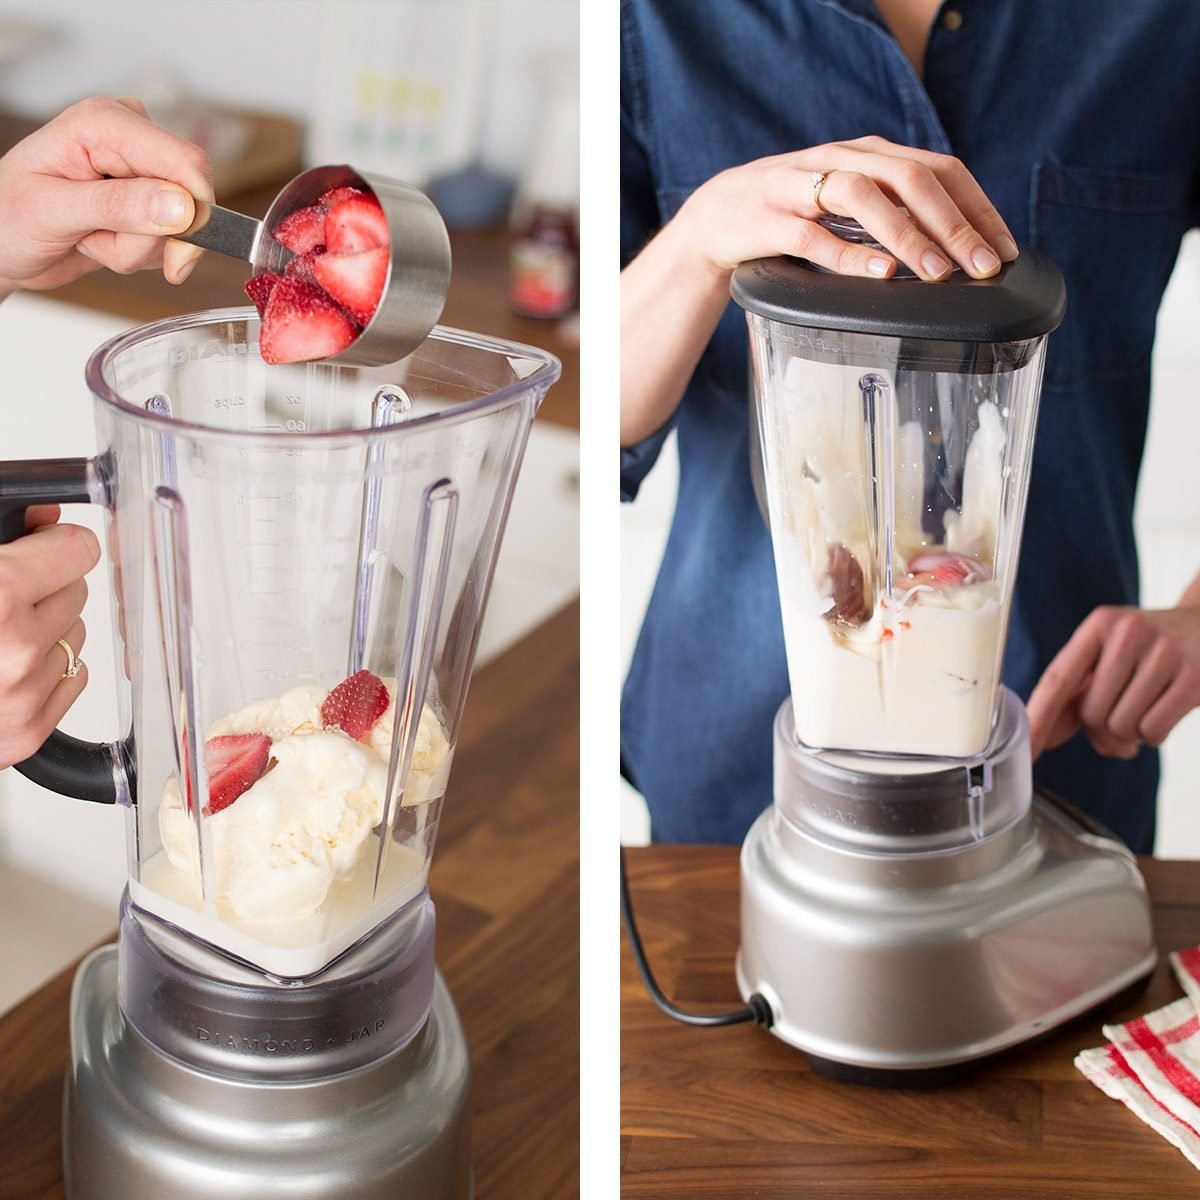 How To Make a Milkshake in a Blender - Cuisine at Home Guides